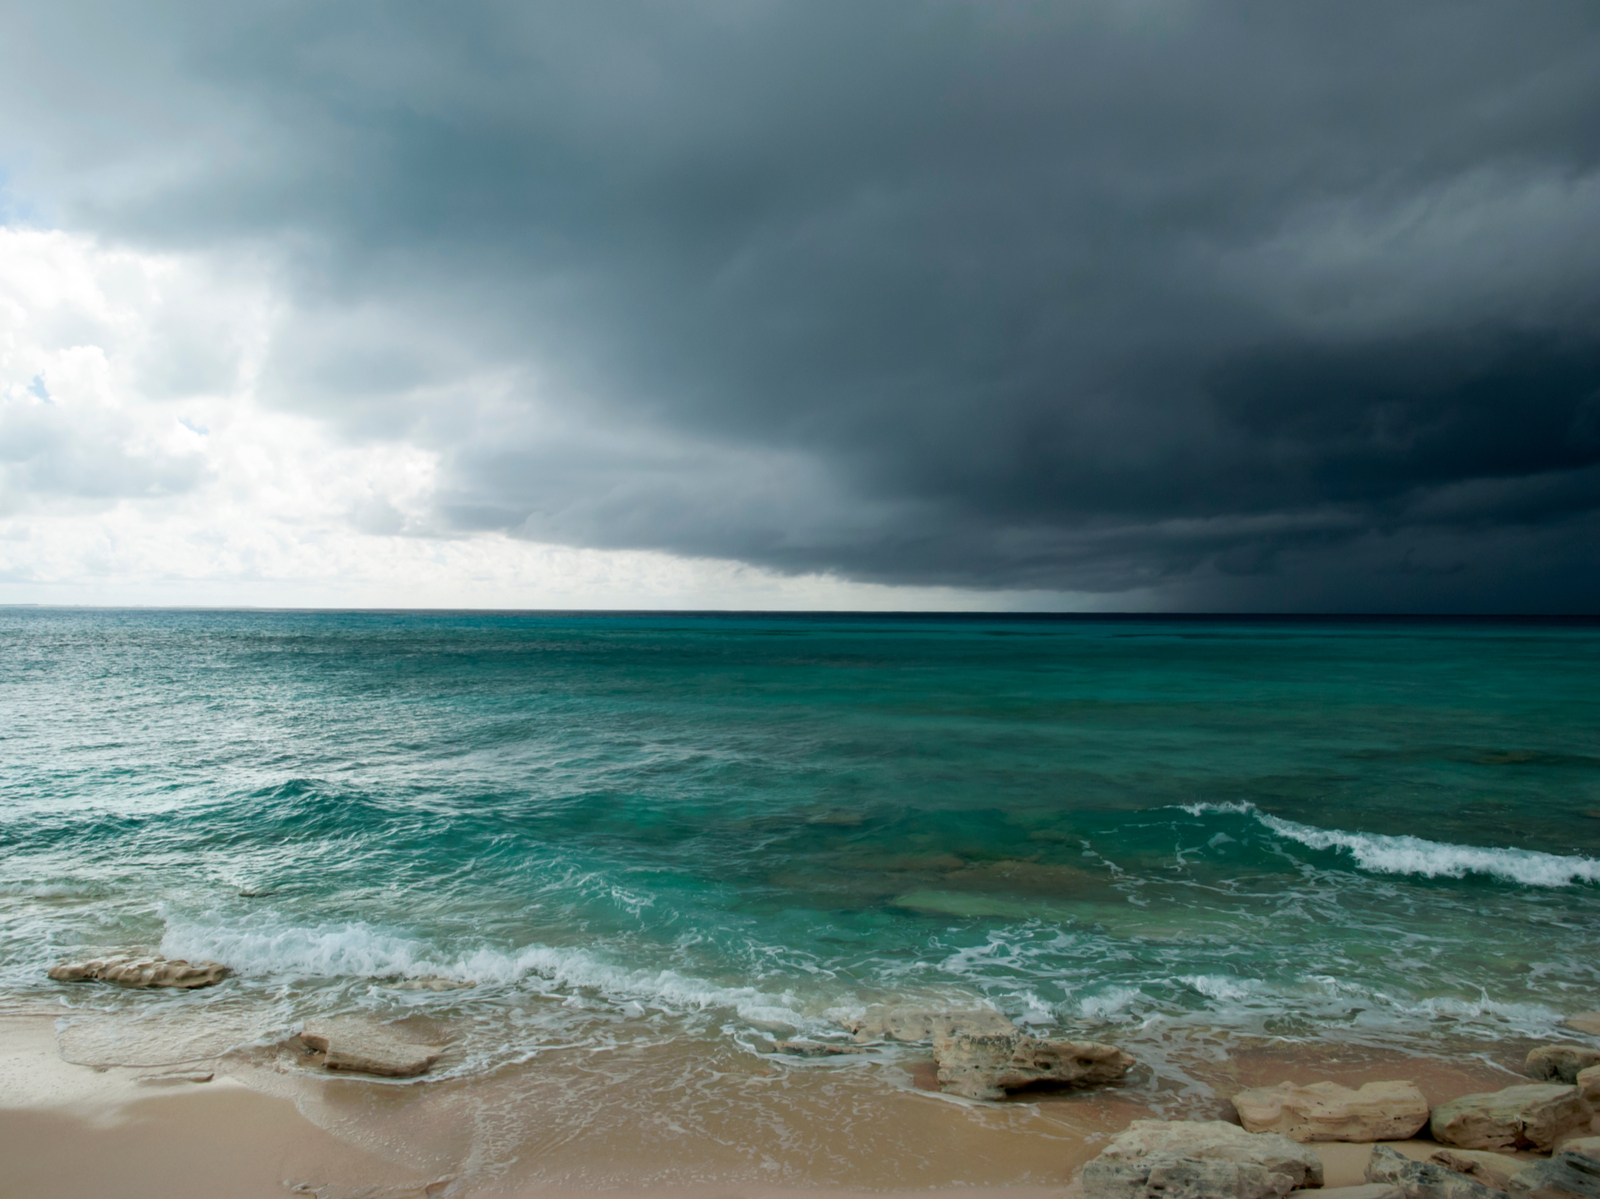 Stormy day over the ocean with rocks and a beach pictured during the worst time to visit Turks and Caicos